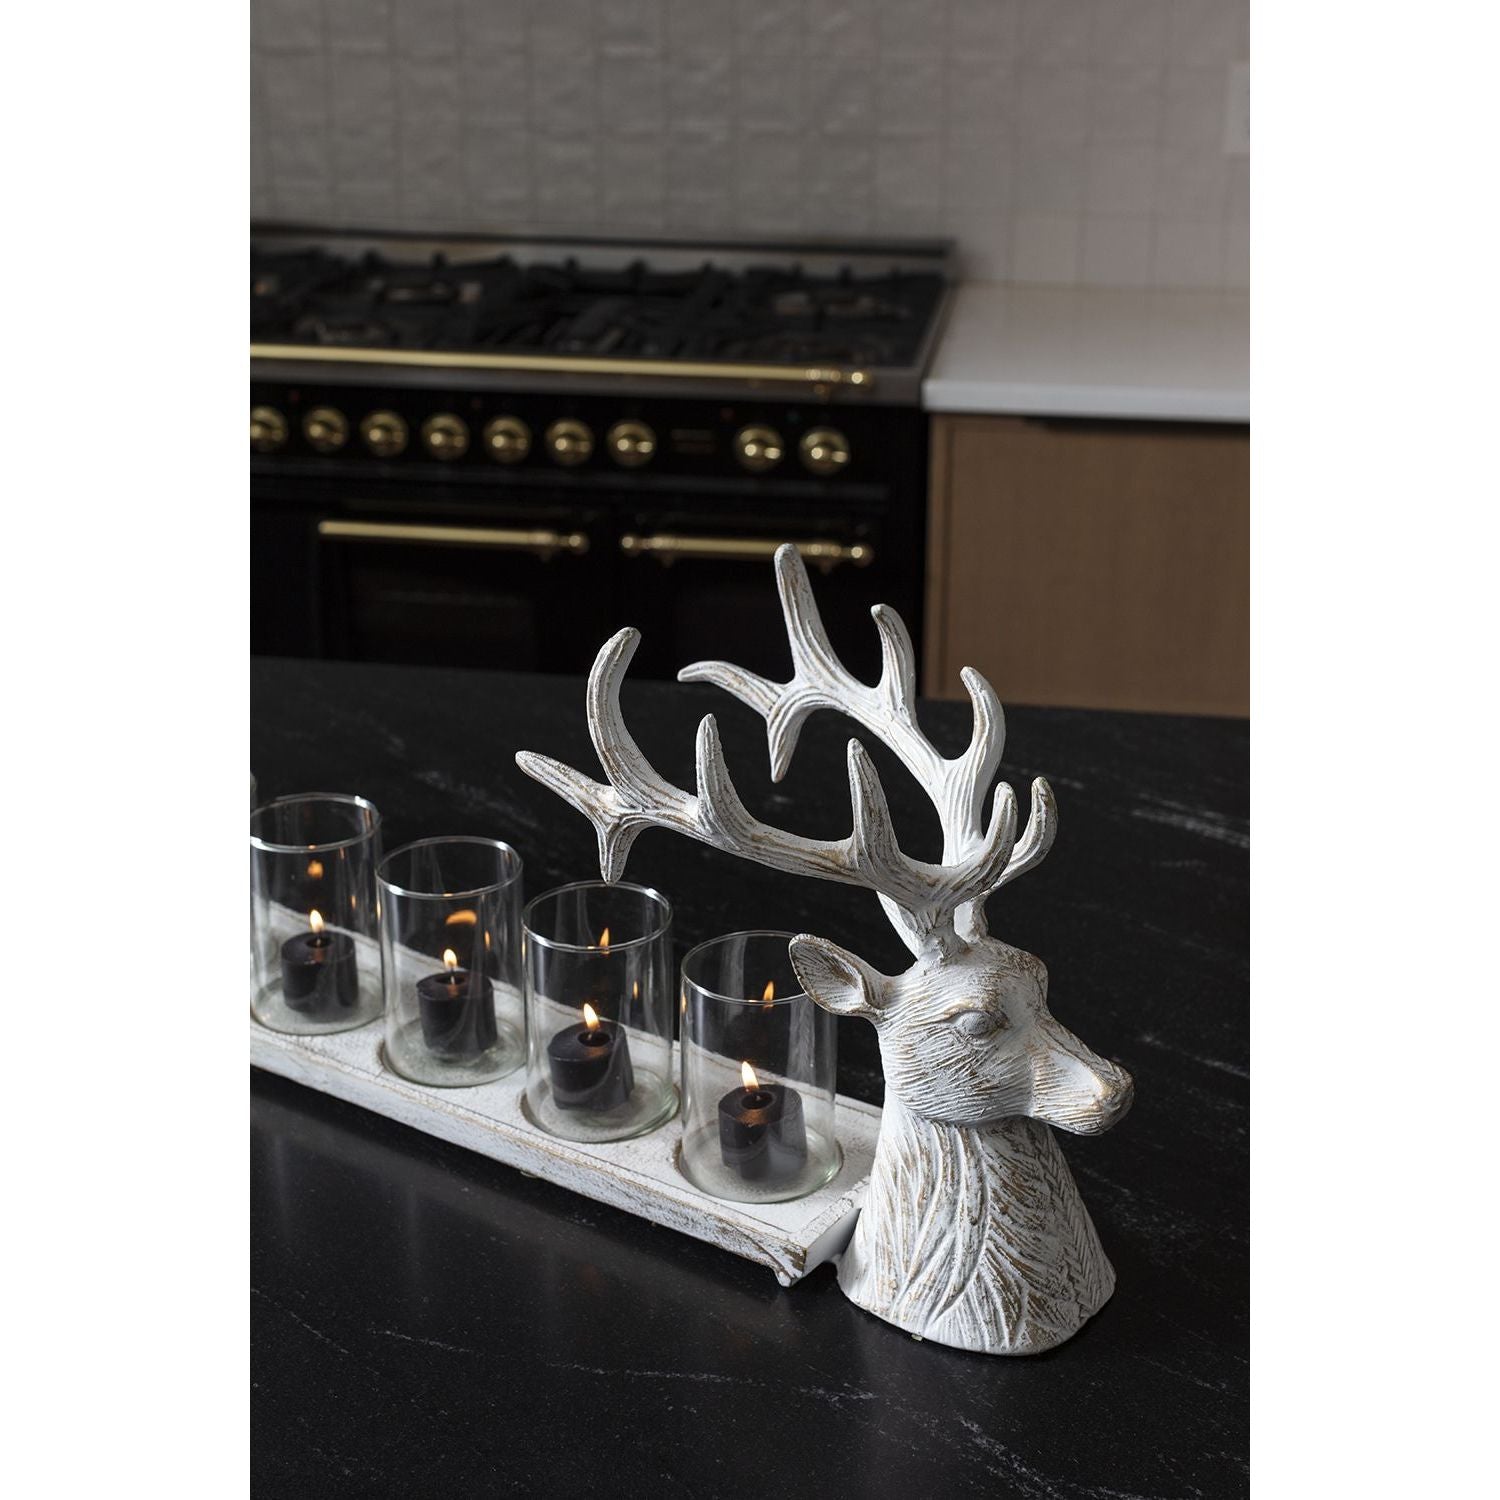 A Reindeer Candleholder is placed on a black countertop. Measuring 35.0 x 6.5 x 11.5, it includes four glass votive holders with lit black candles on a white base. Behind the countertop is a modern kitchen with a black and gold stove and light-colored cabinetry.
